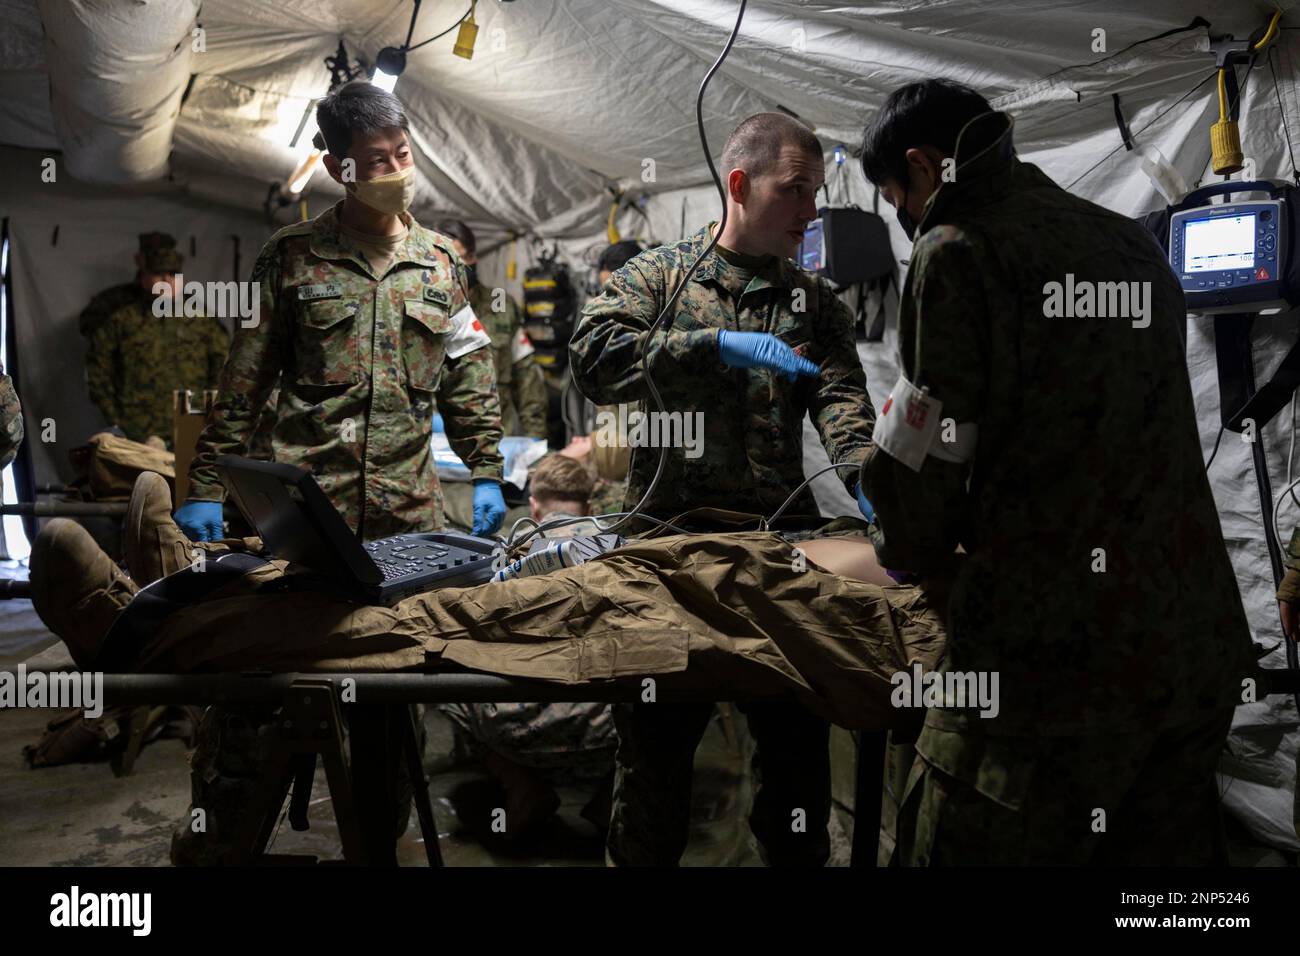 Hijudai, Japan. 19th Feb, 2023. U.S. Navy corpsmen with the 31st Marine Expeditionary Unit, and soldiers with the 1st Amphibious Rapid Deployment Regiment, Japan Ground Self-Defense Force, examine vital signs on a simulated casualty during a mass casualty exercise at Hijudai, Japan on February. 19, 2023. The training simulated a mass casualty event granting the bi-lateral medical team an opportunity to actively practice medical care in the field with closely simulated pressure and conditions during Iron Fist 23. Iron Fist is an annual bilateral exercise designed to increase interoperabili Stock Photo